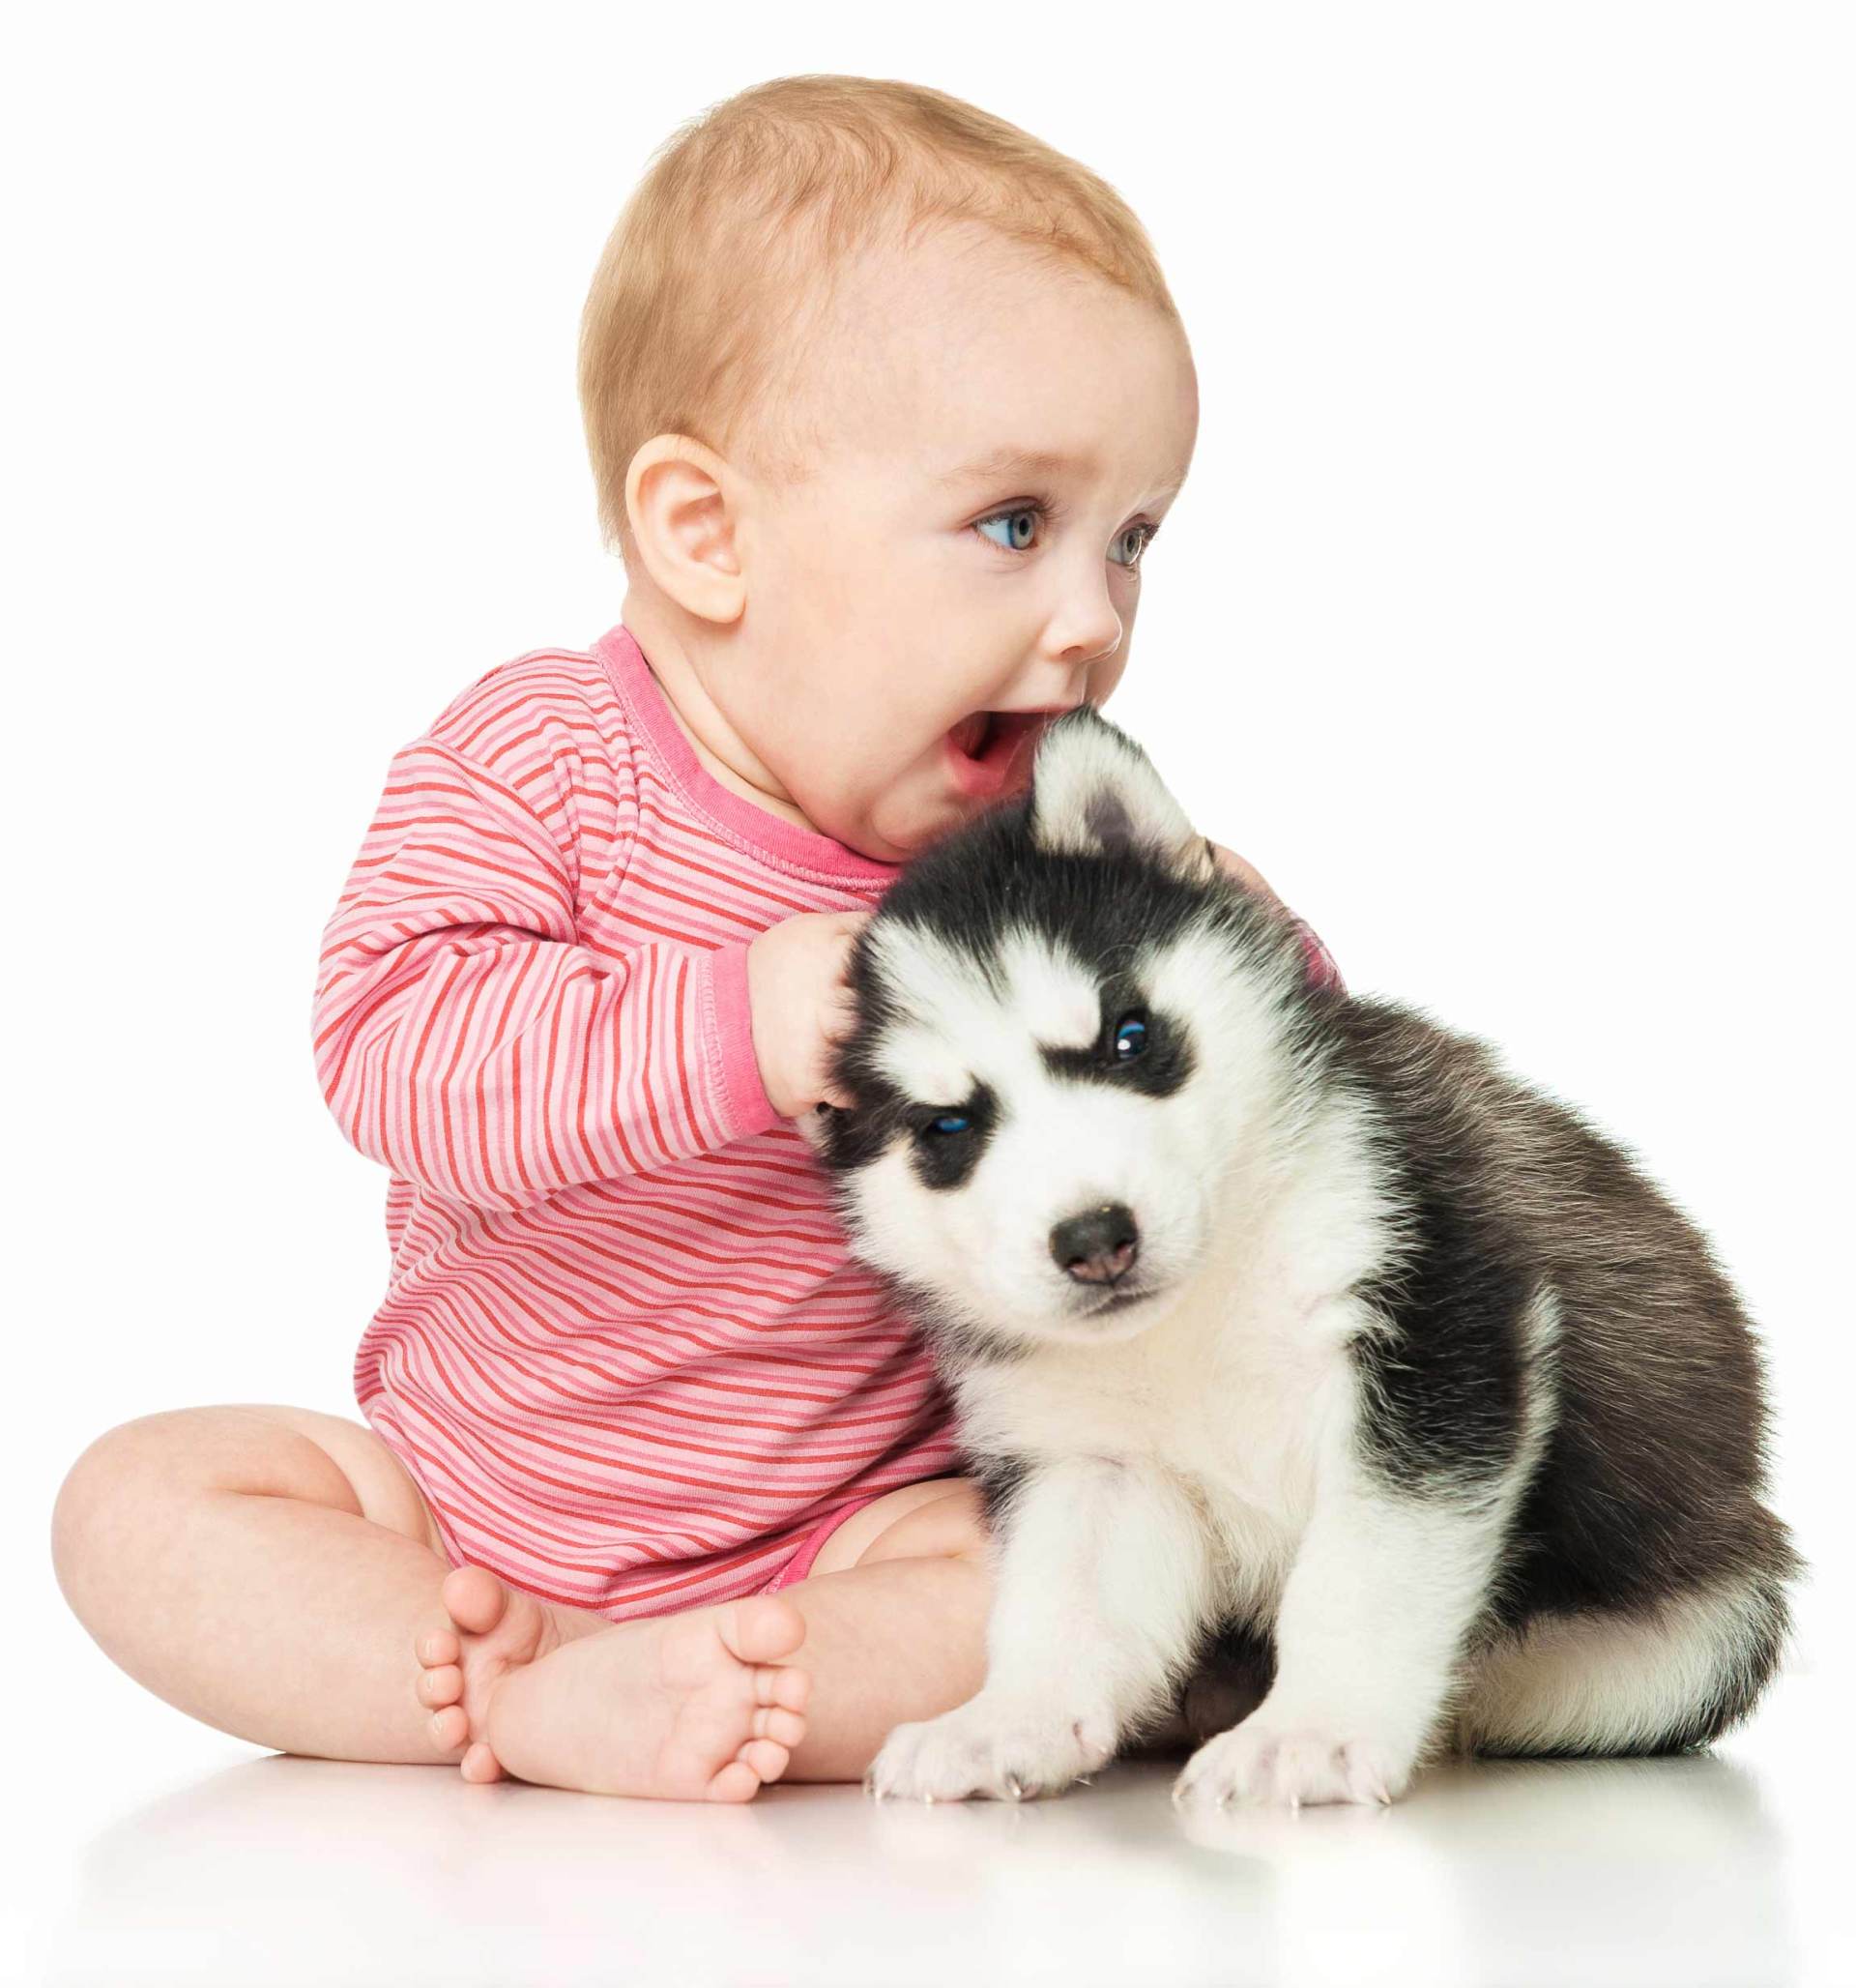 Young Toddler and Puppy | Reno, NV | Statewide Termite and Pest Control Inc